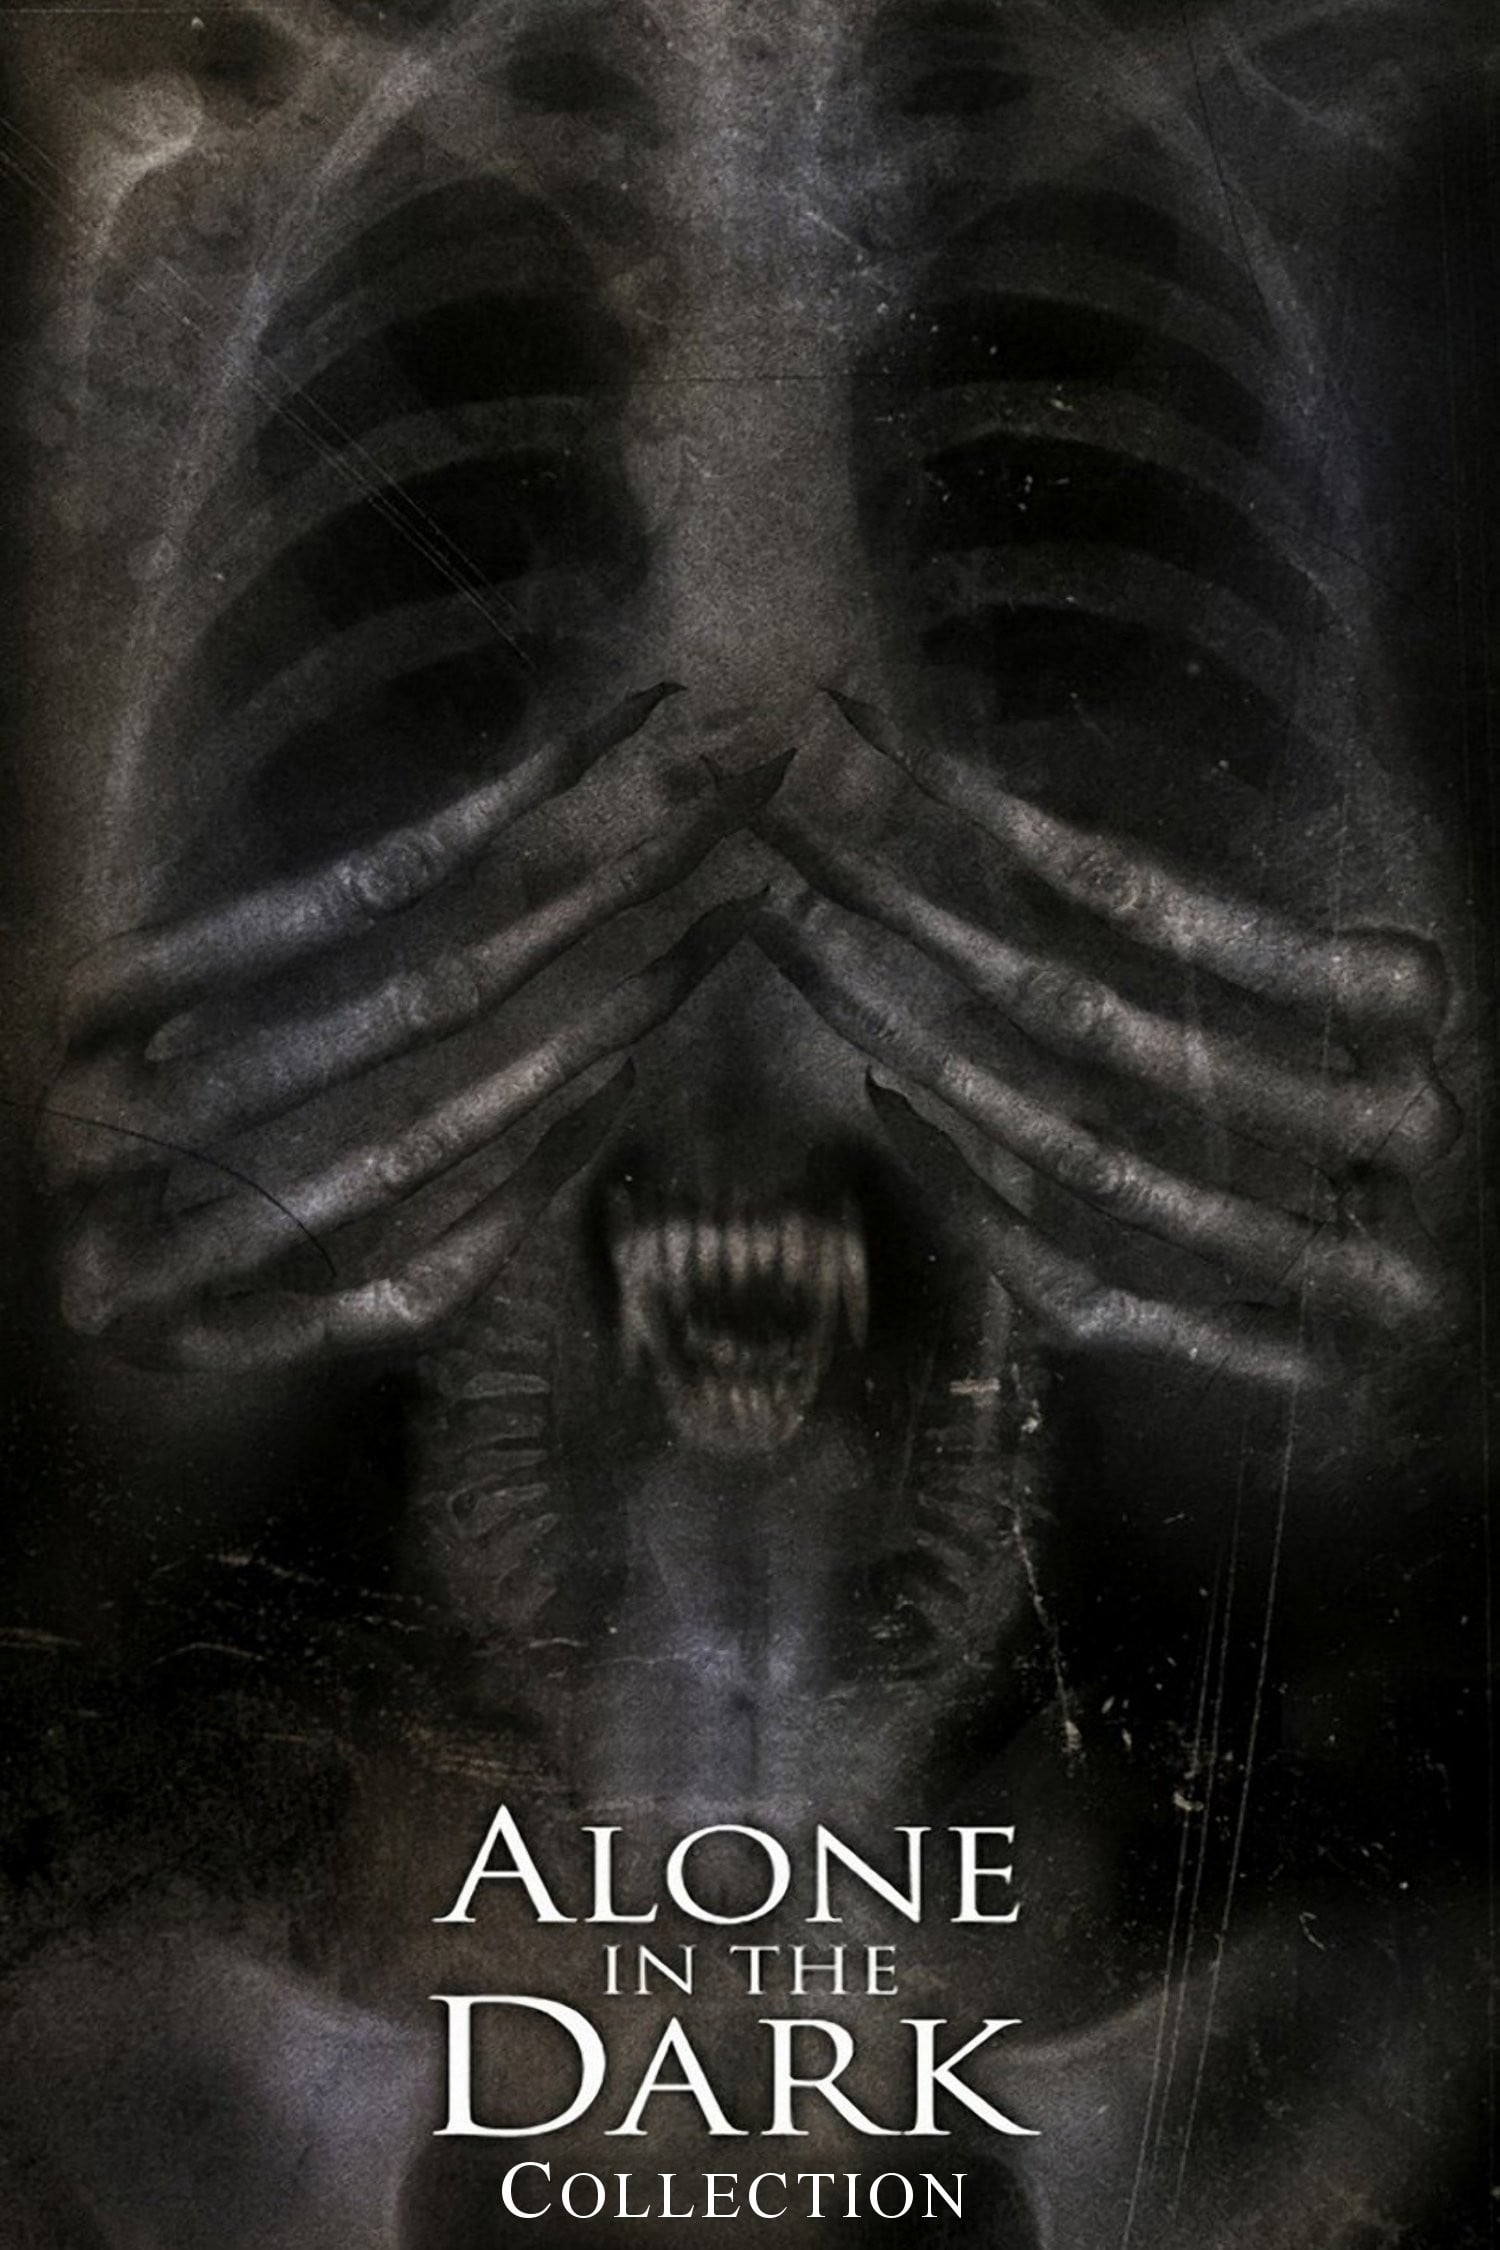 Alone in the Dark Collection The Poster Database (TPDb)